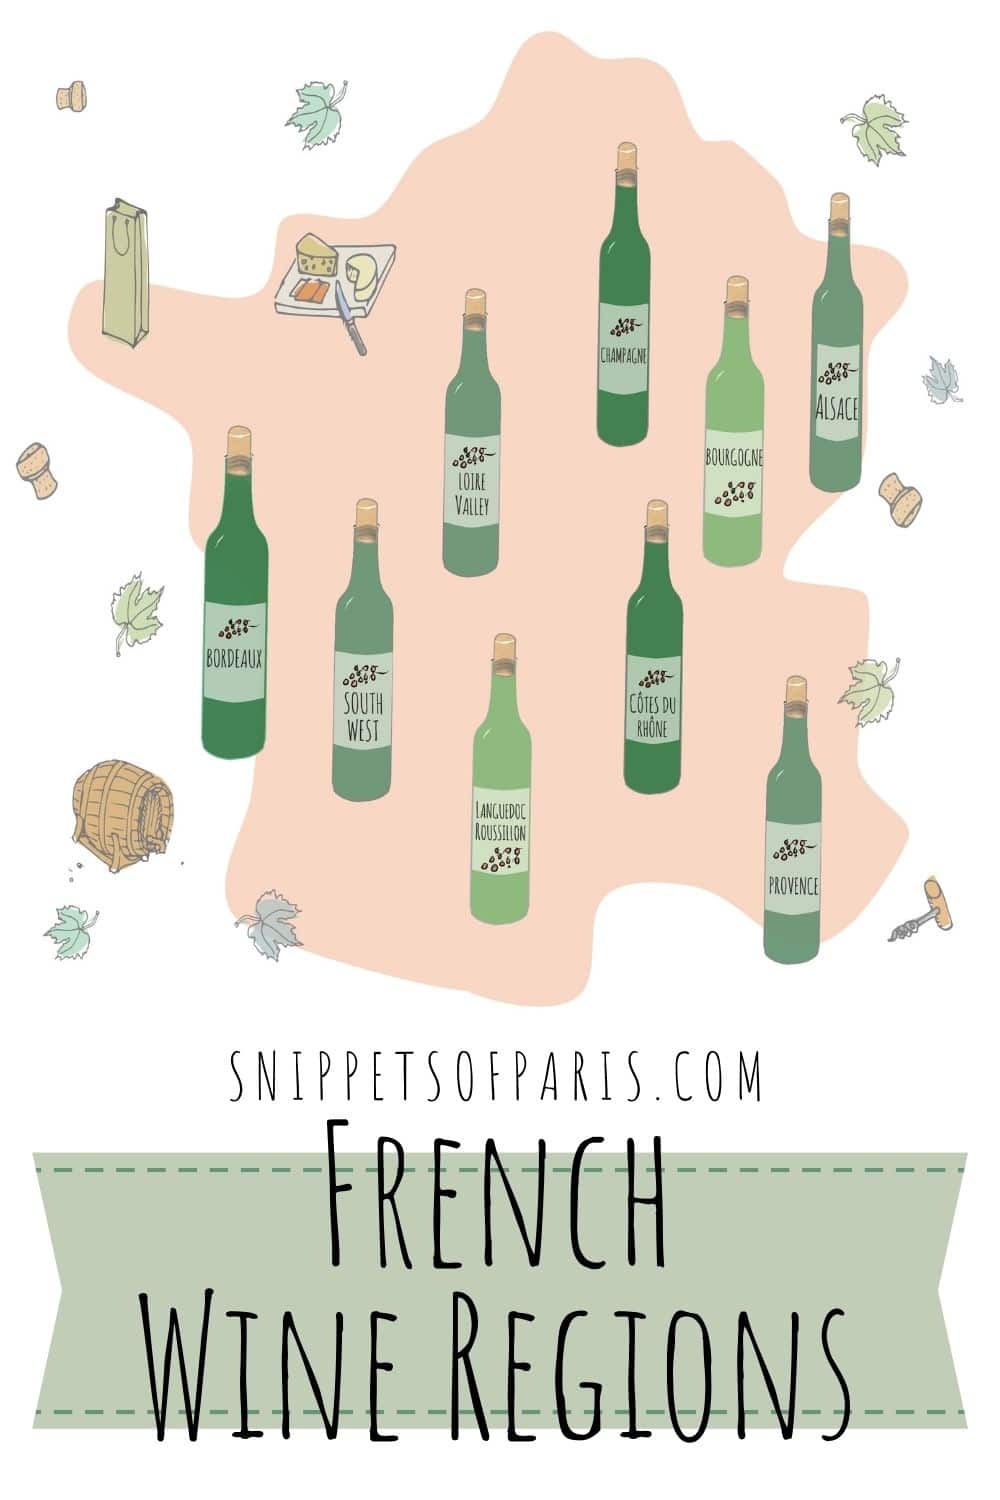 Wine Regions of France: Guide to the Best French Wines